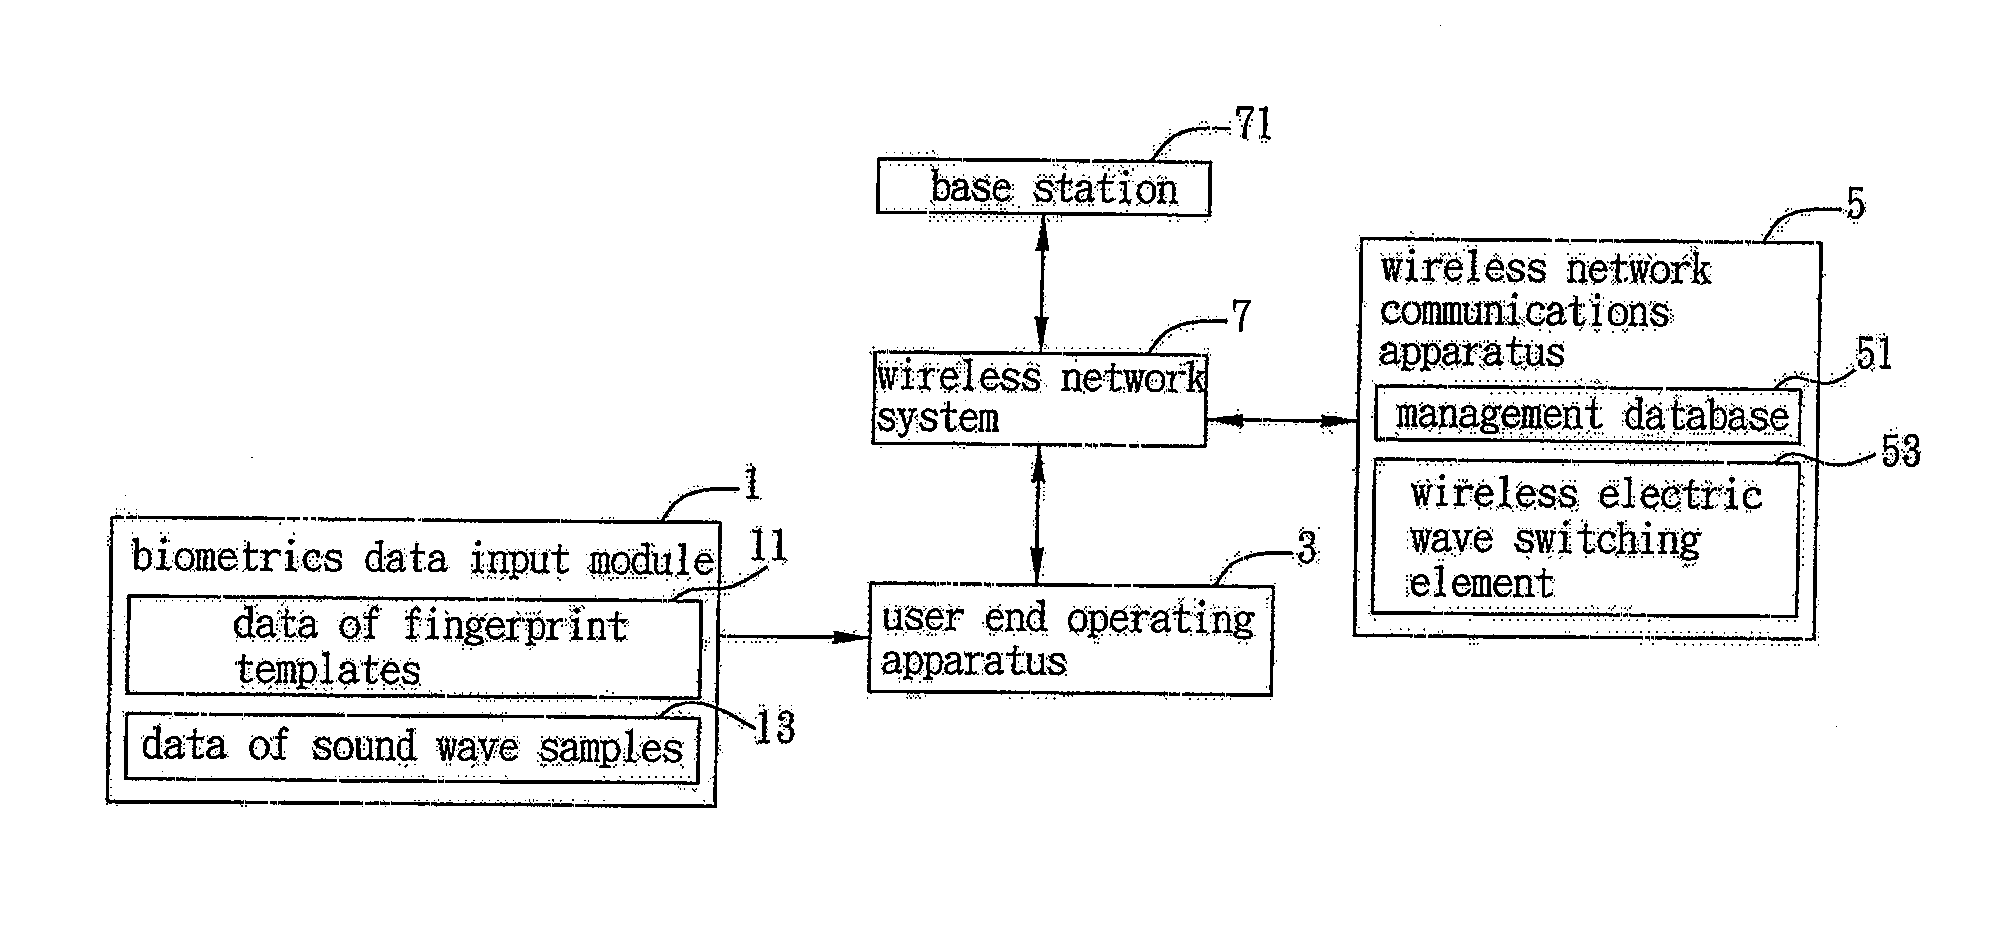 Fingerprint authentication method for accessing wireless network systems